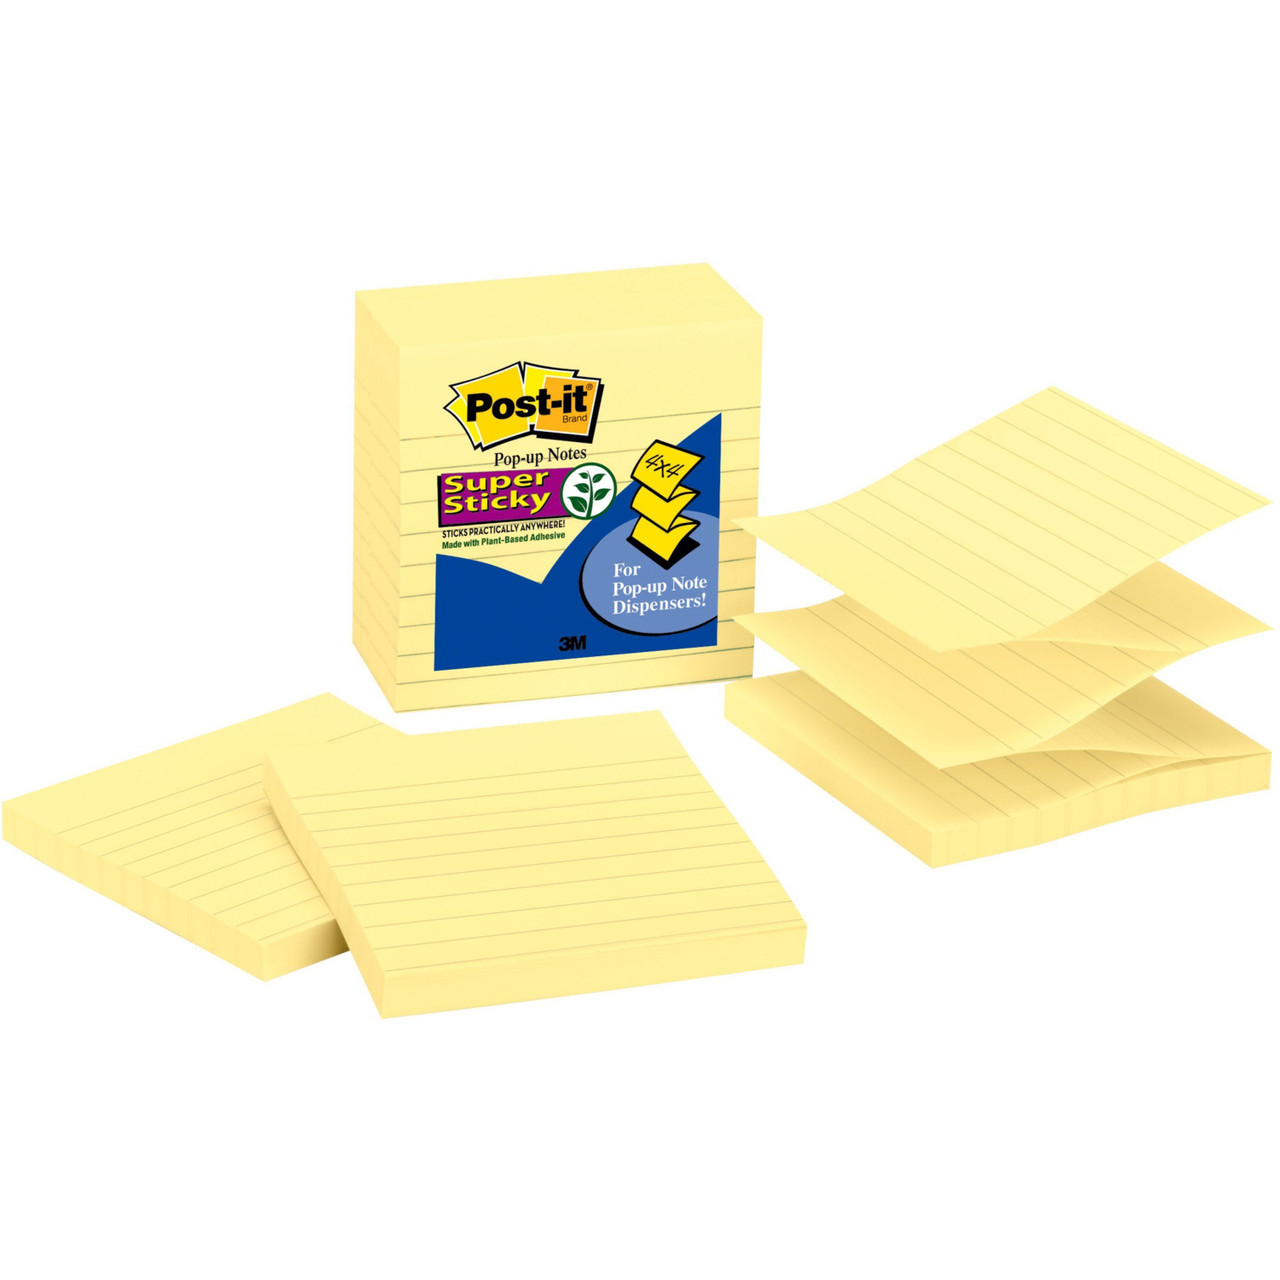  Post-it Super Sticky Recycled Notes, 4x4 in, 6 Pads